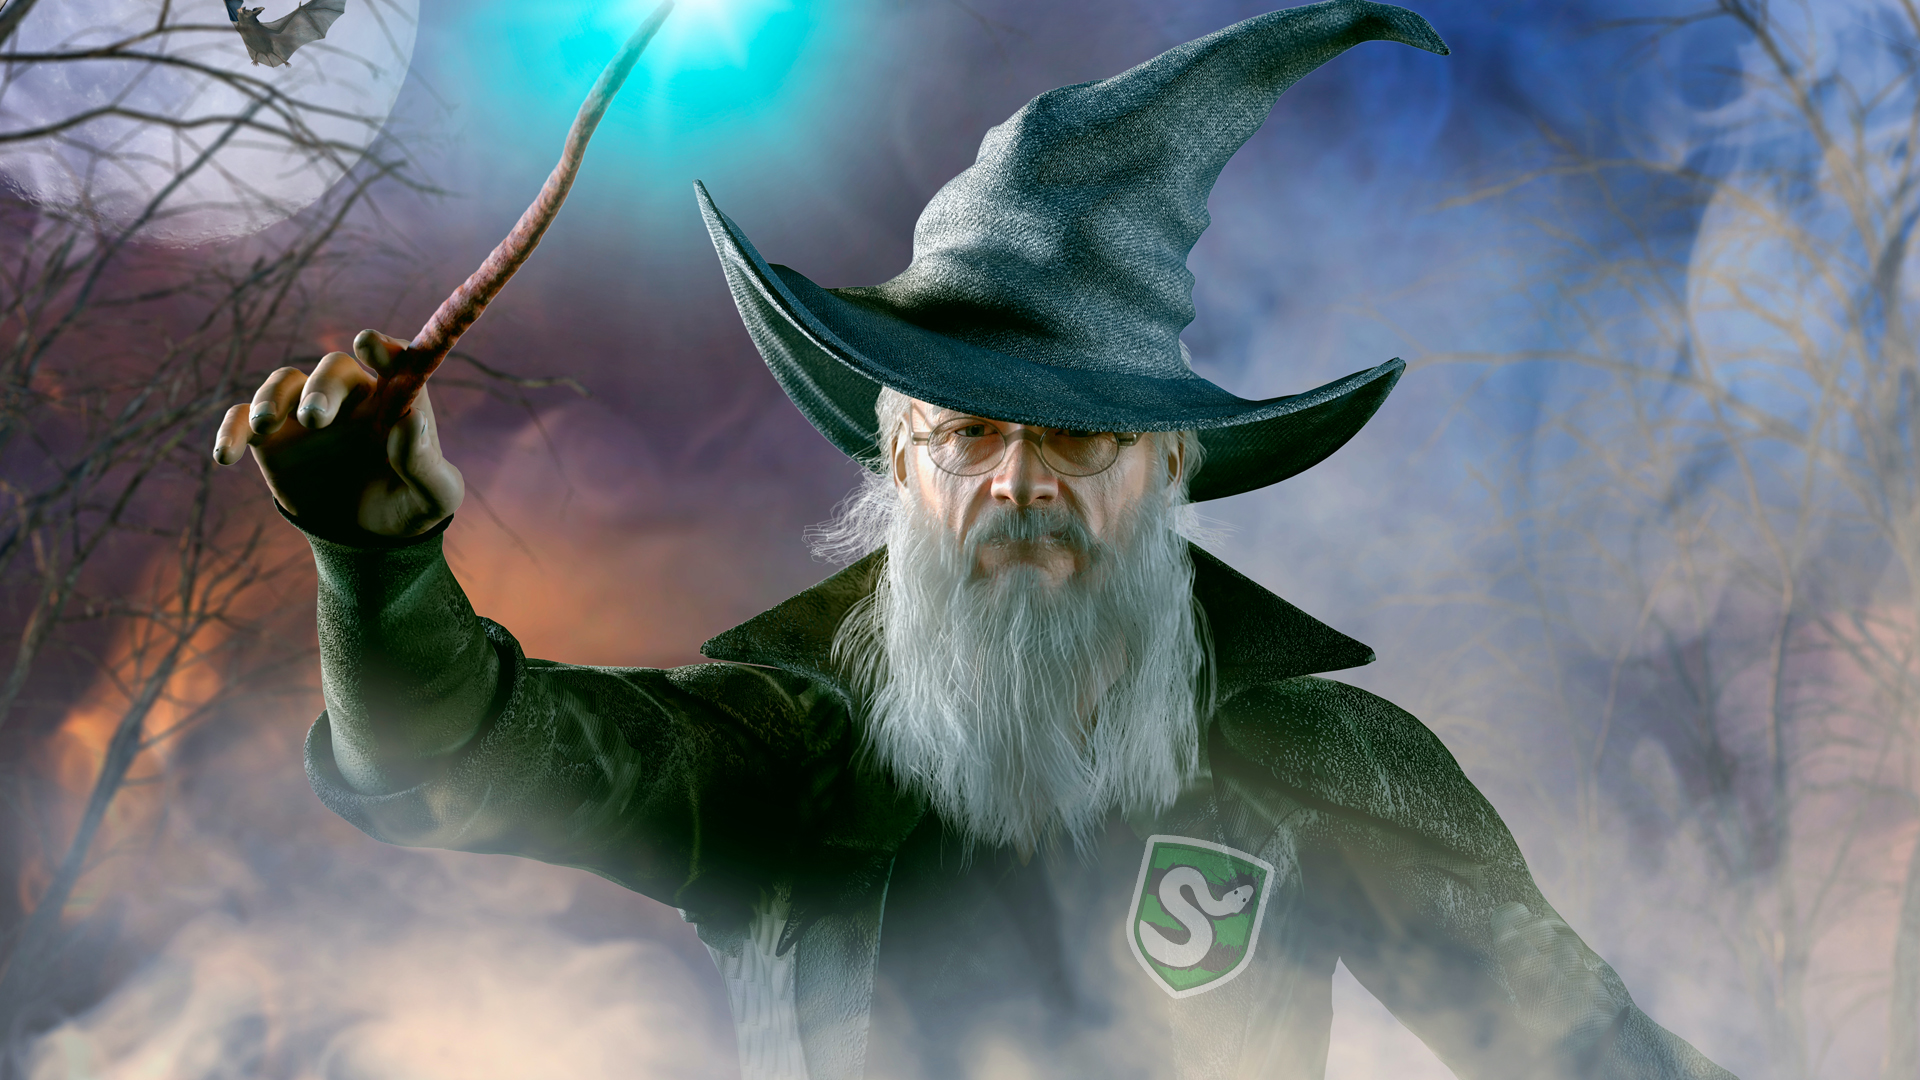 An old wizard